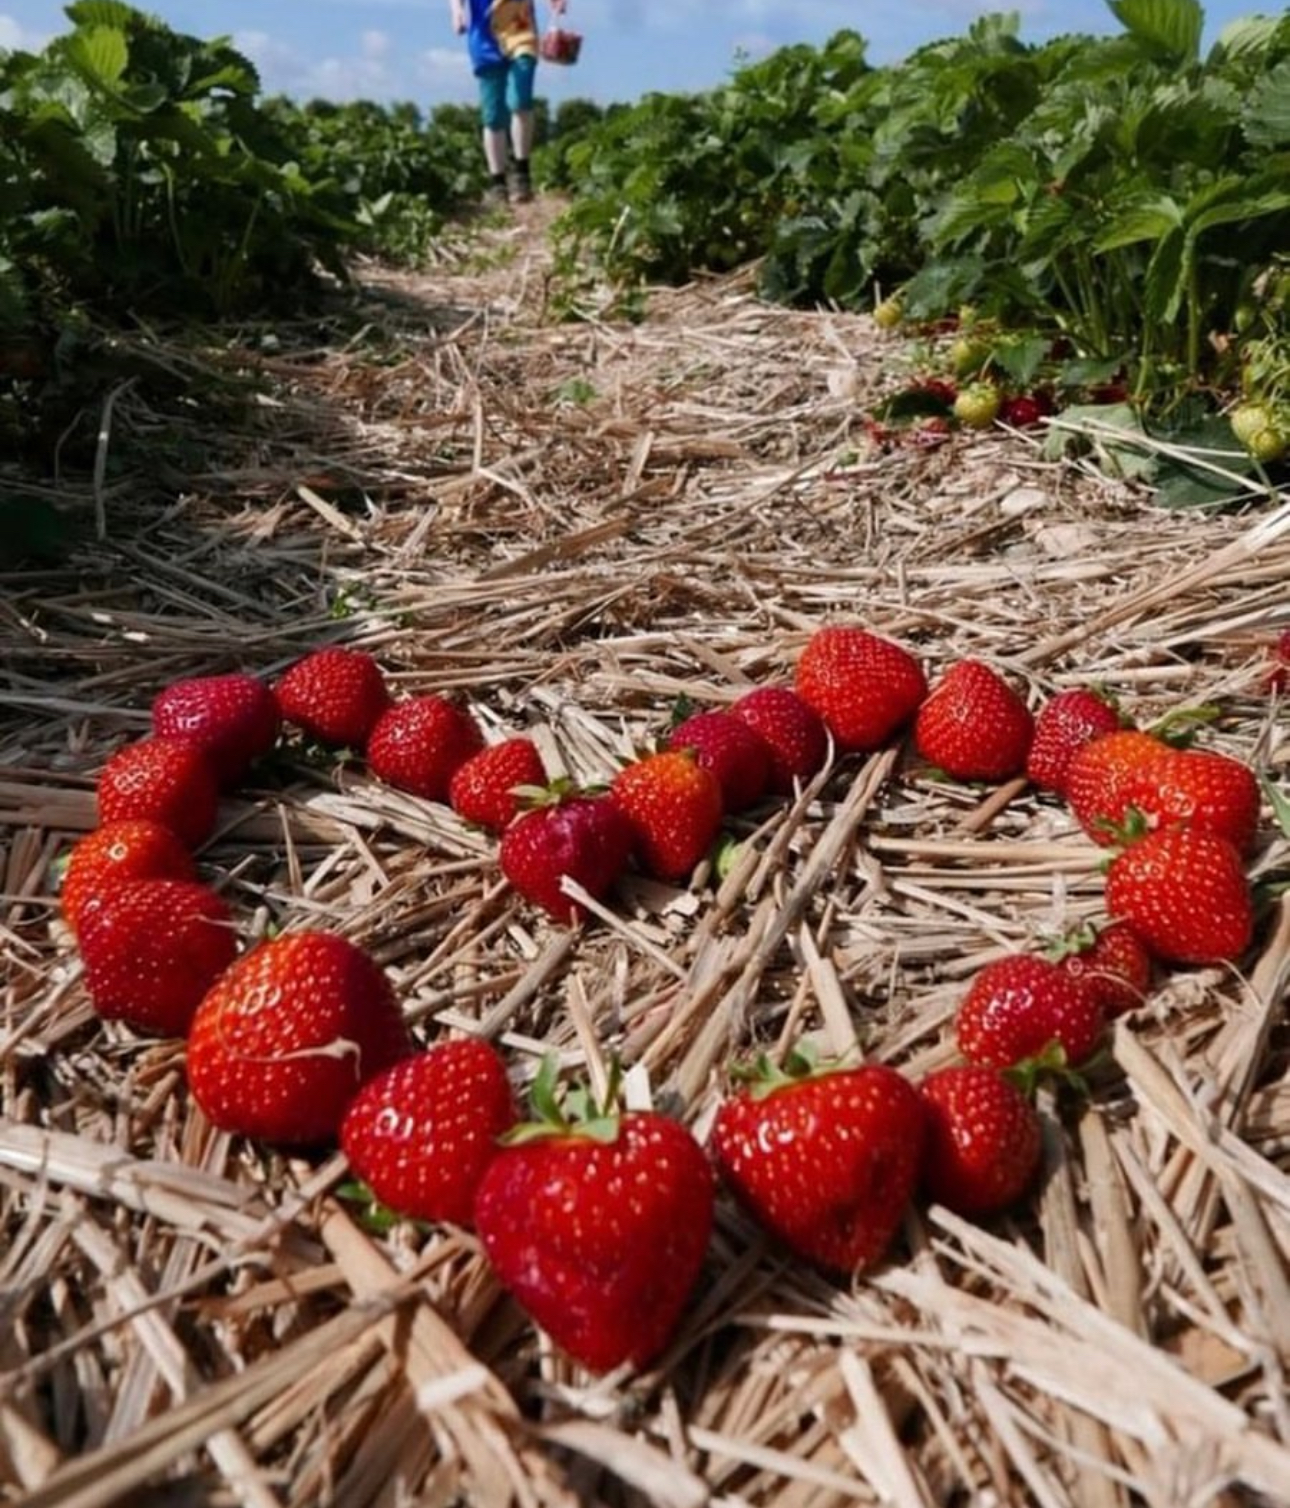 Image of strawberries laying in the shape of a heart in a strawberry patch